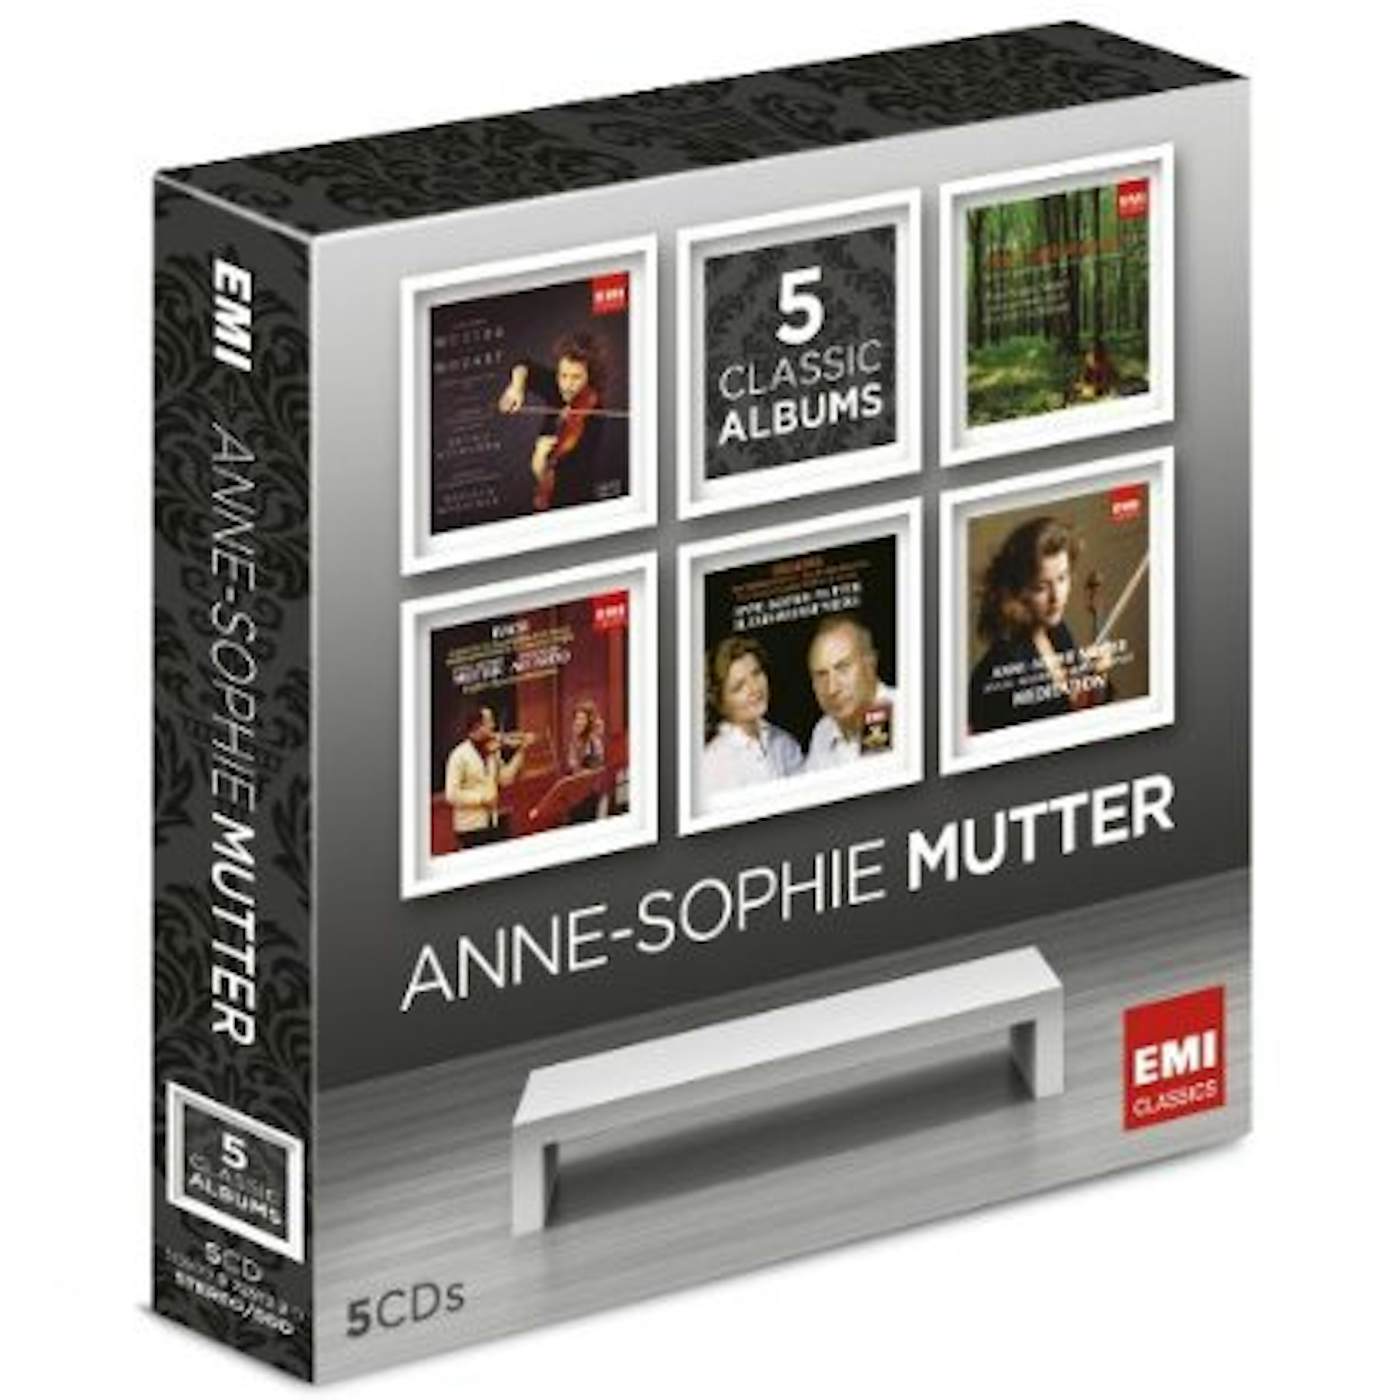 Anne-Sophie Mutter 5 CLASSIC ALBUMS CD